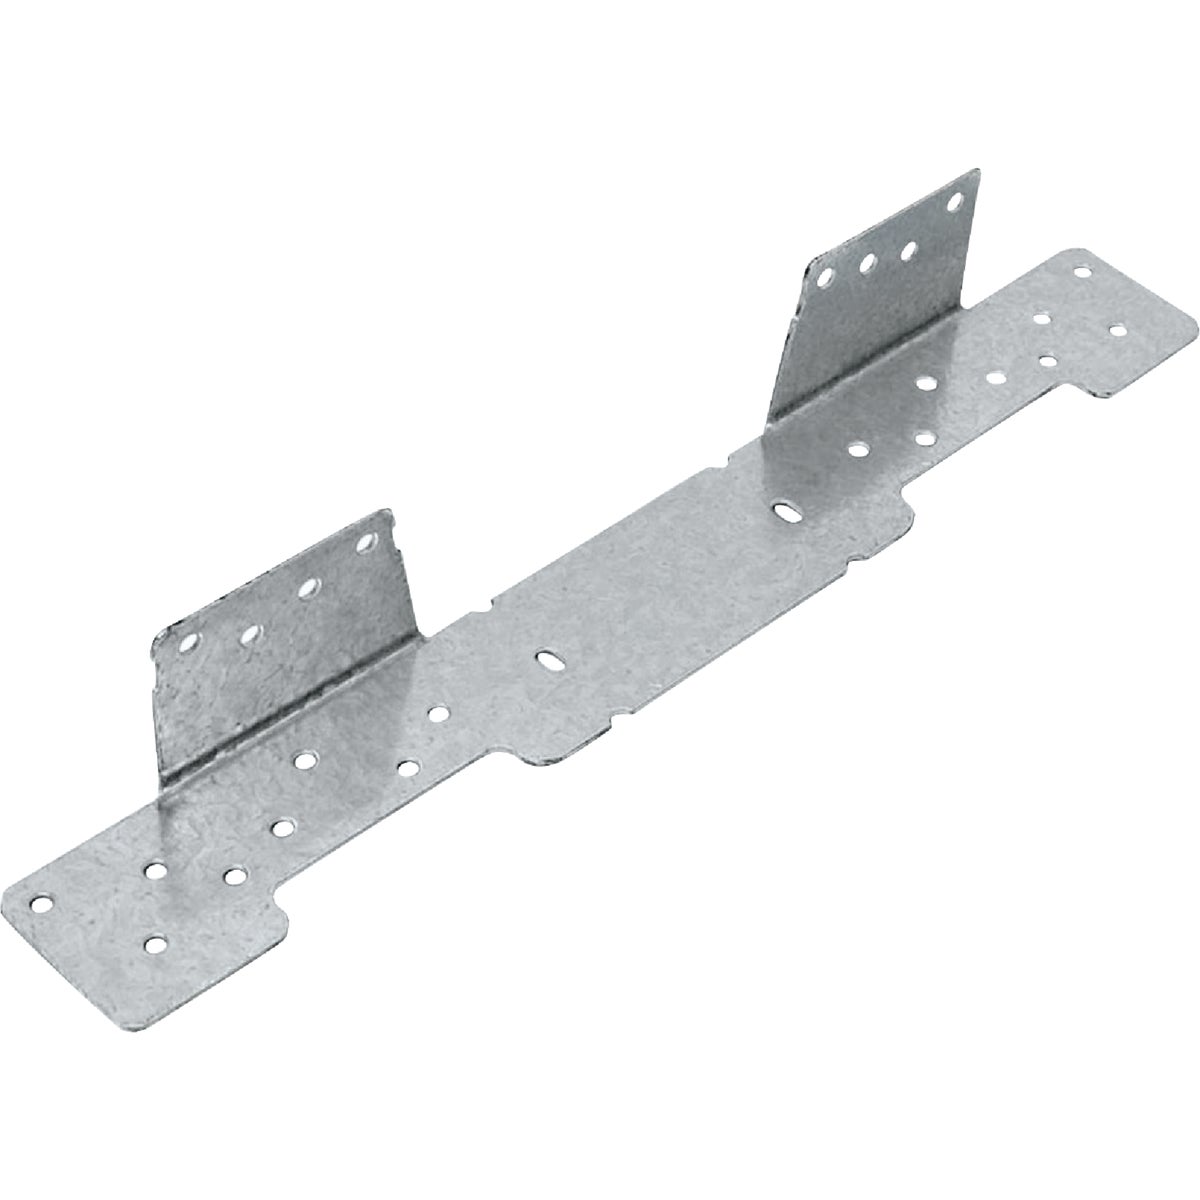 Item 105651, The LSCZ adjustable stair-stringer connector offers a versatile, concealed 